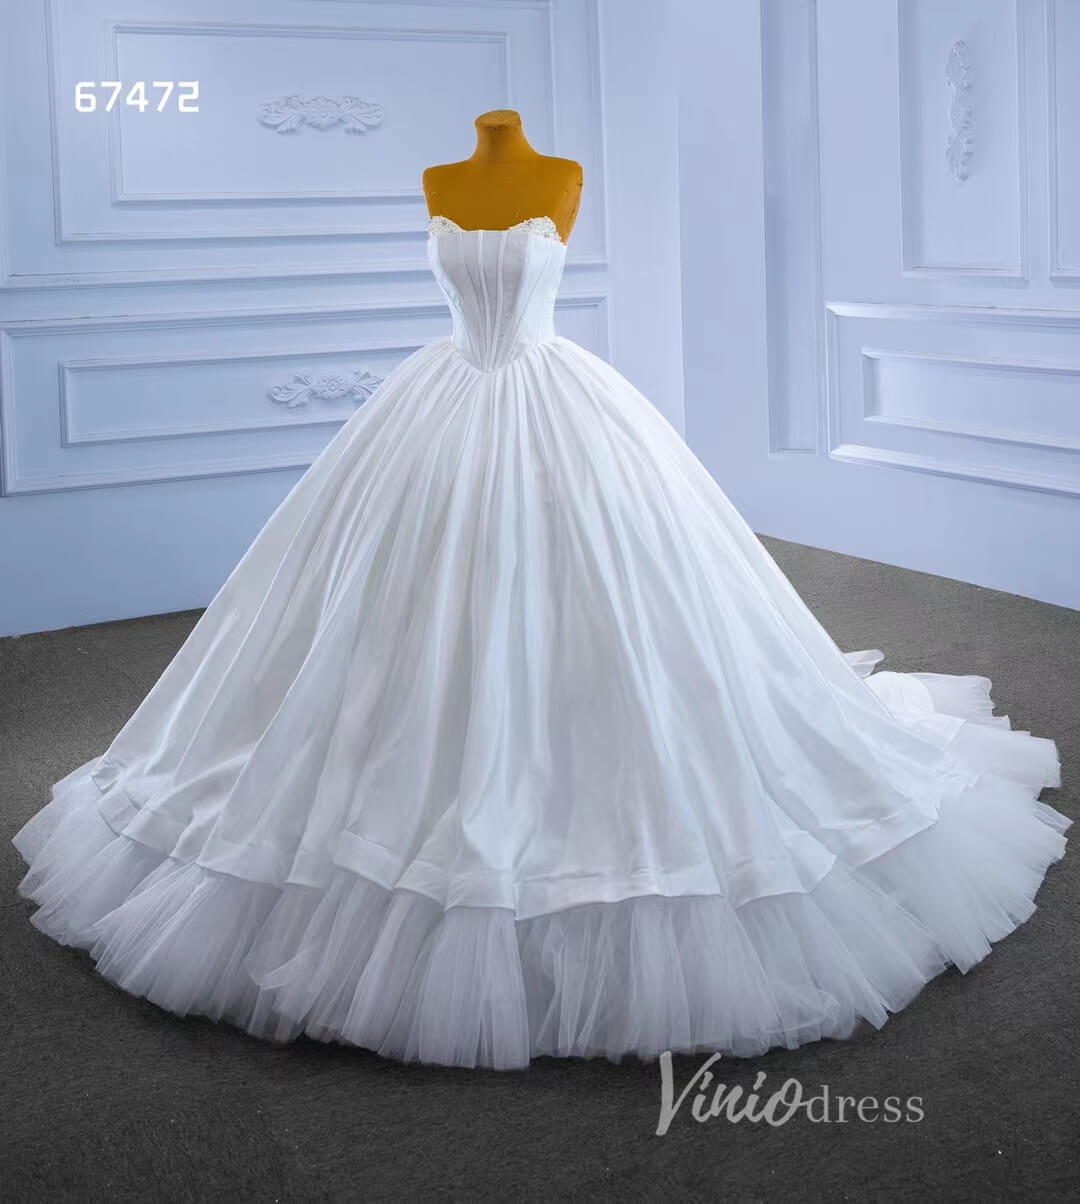 Simple White Ball Gown Wedding Dresses Strapless Corset Dress 67472-wedding dresses-Viniodress-Viniodress